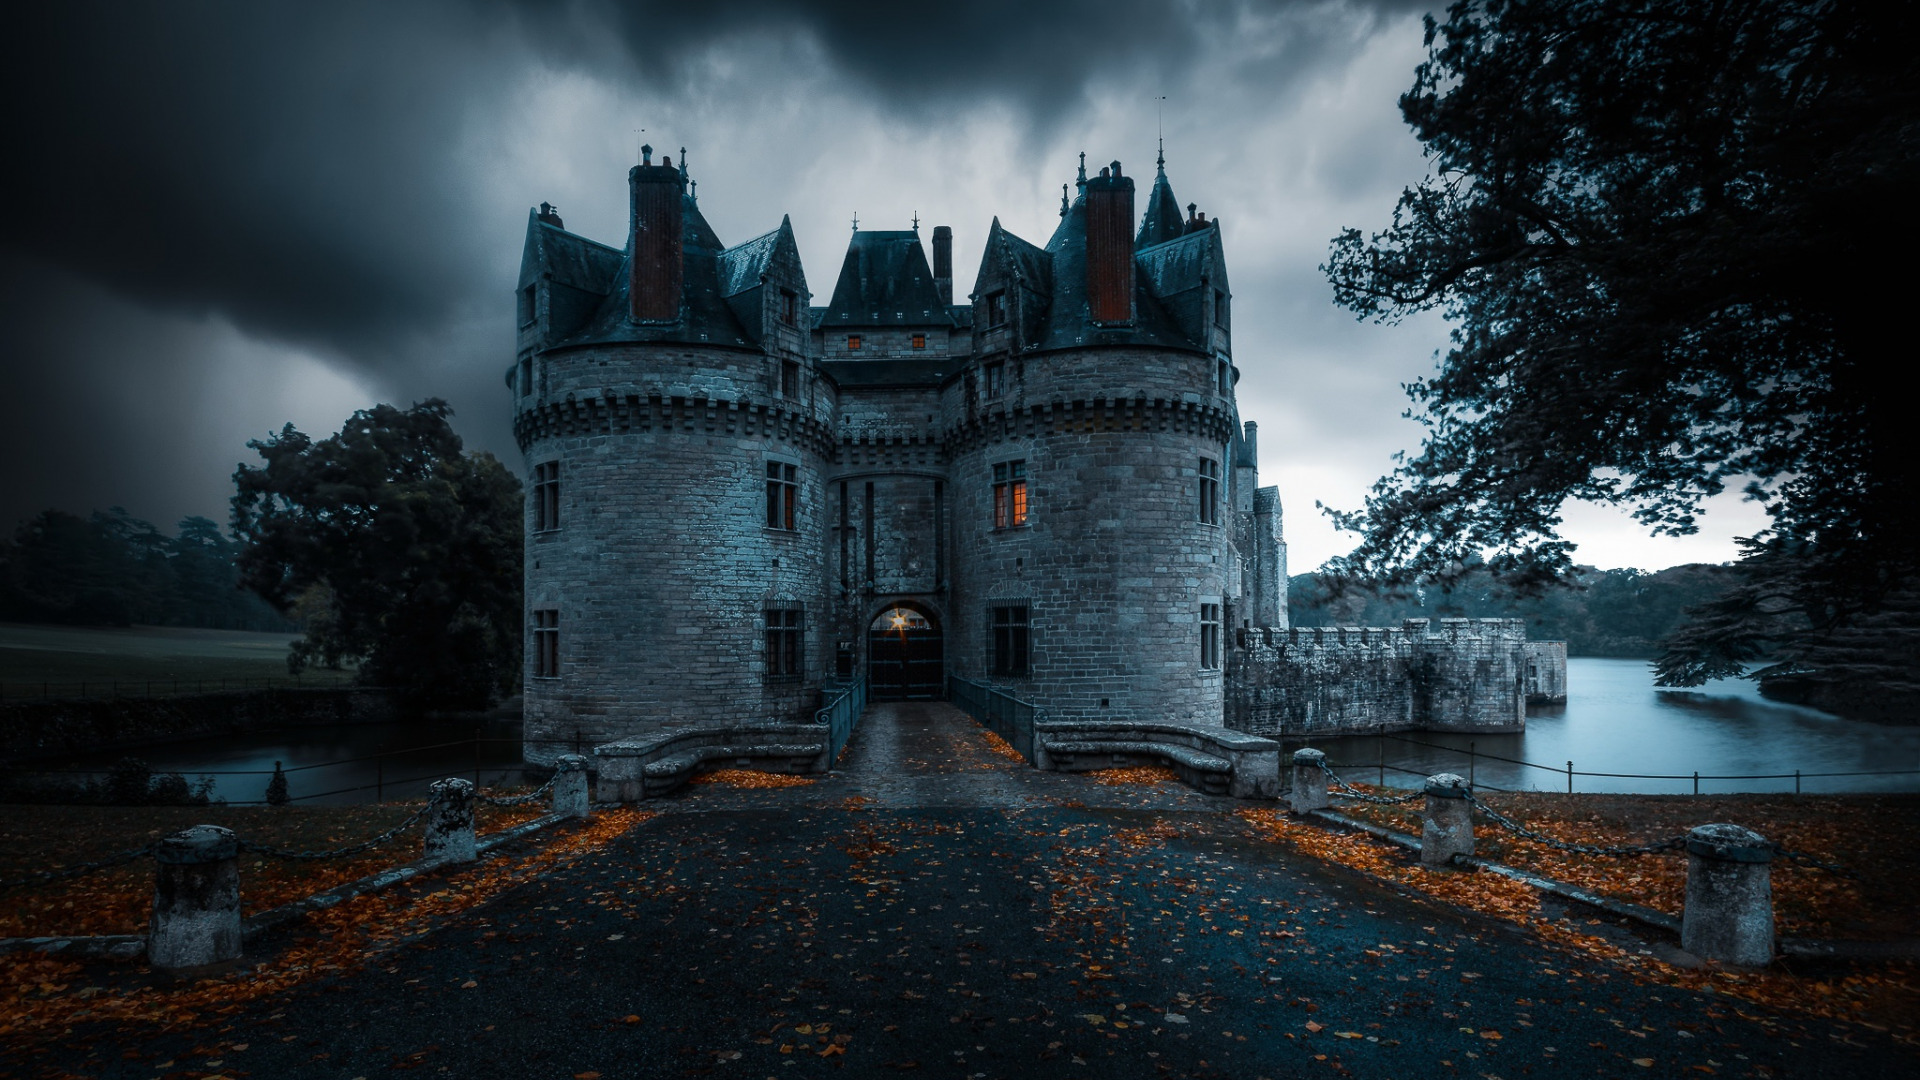 General 1920x1080 architecture castle France ancient dark lake trees fall fallen leaves evening clouds overcast